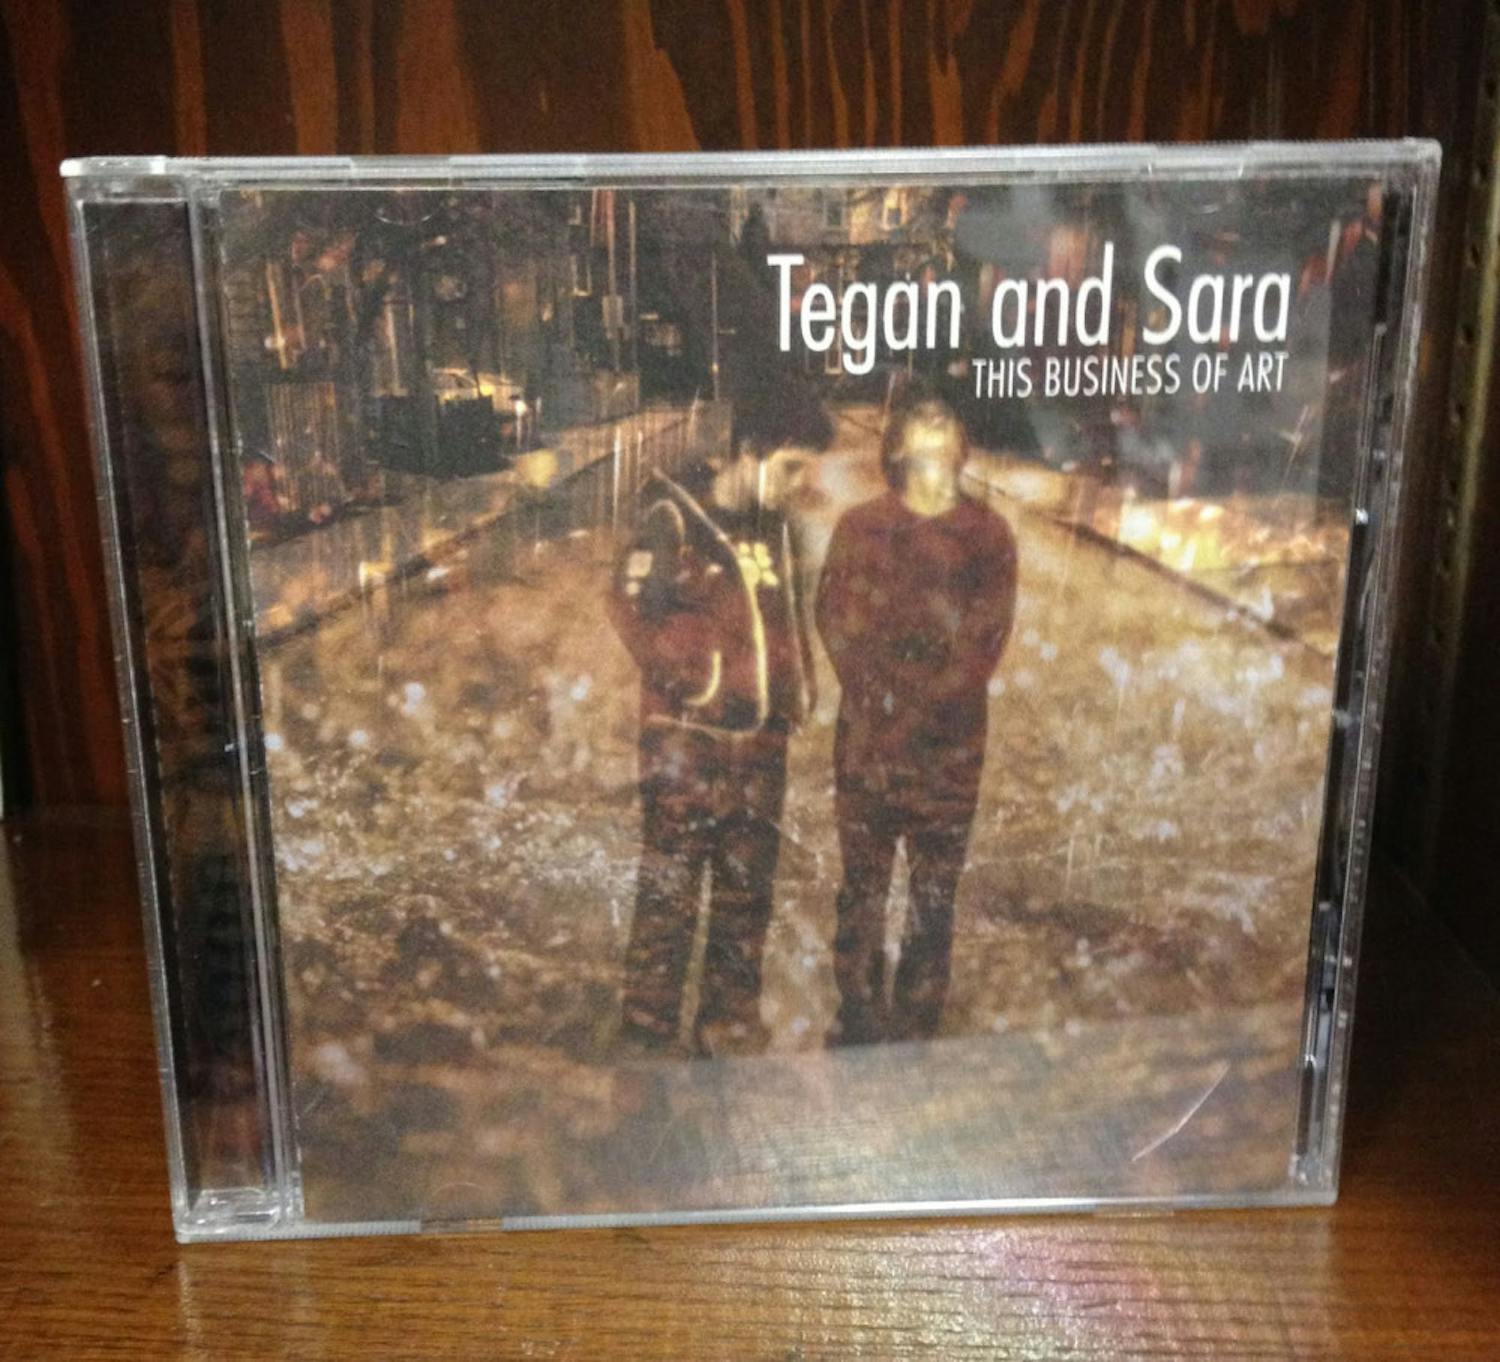 This Business of Art, by Tegan and Sara
$2